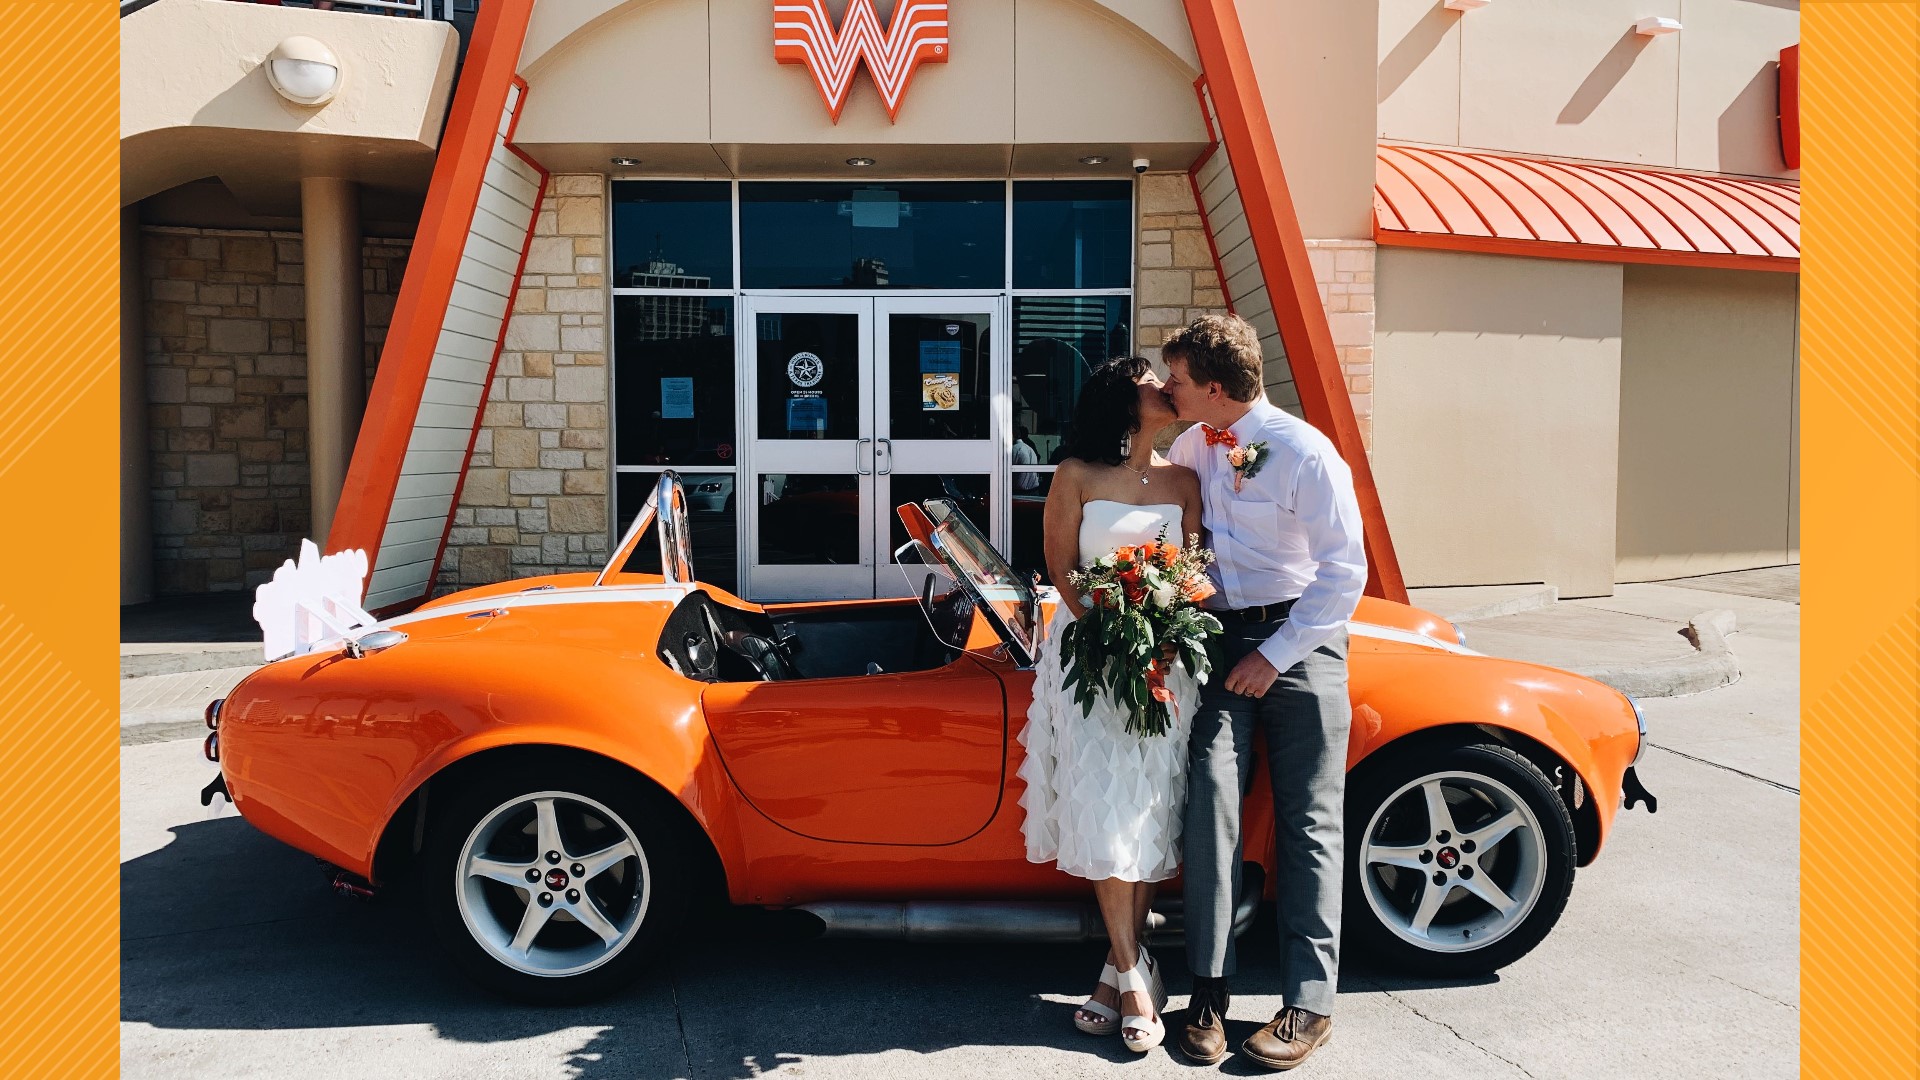 Sharon Arteaga and Dylan Welch will tie the knot at Whataburger after winning the Whatawedding contest.